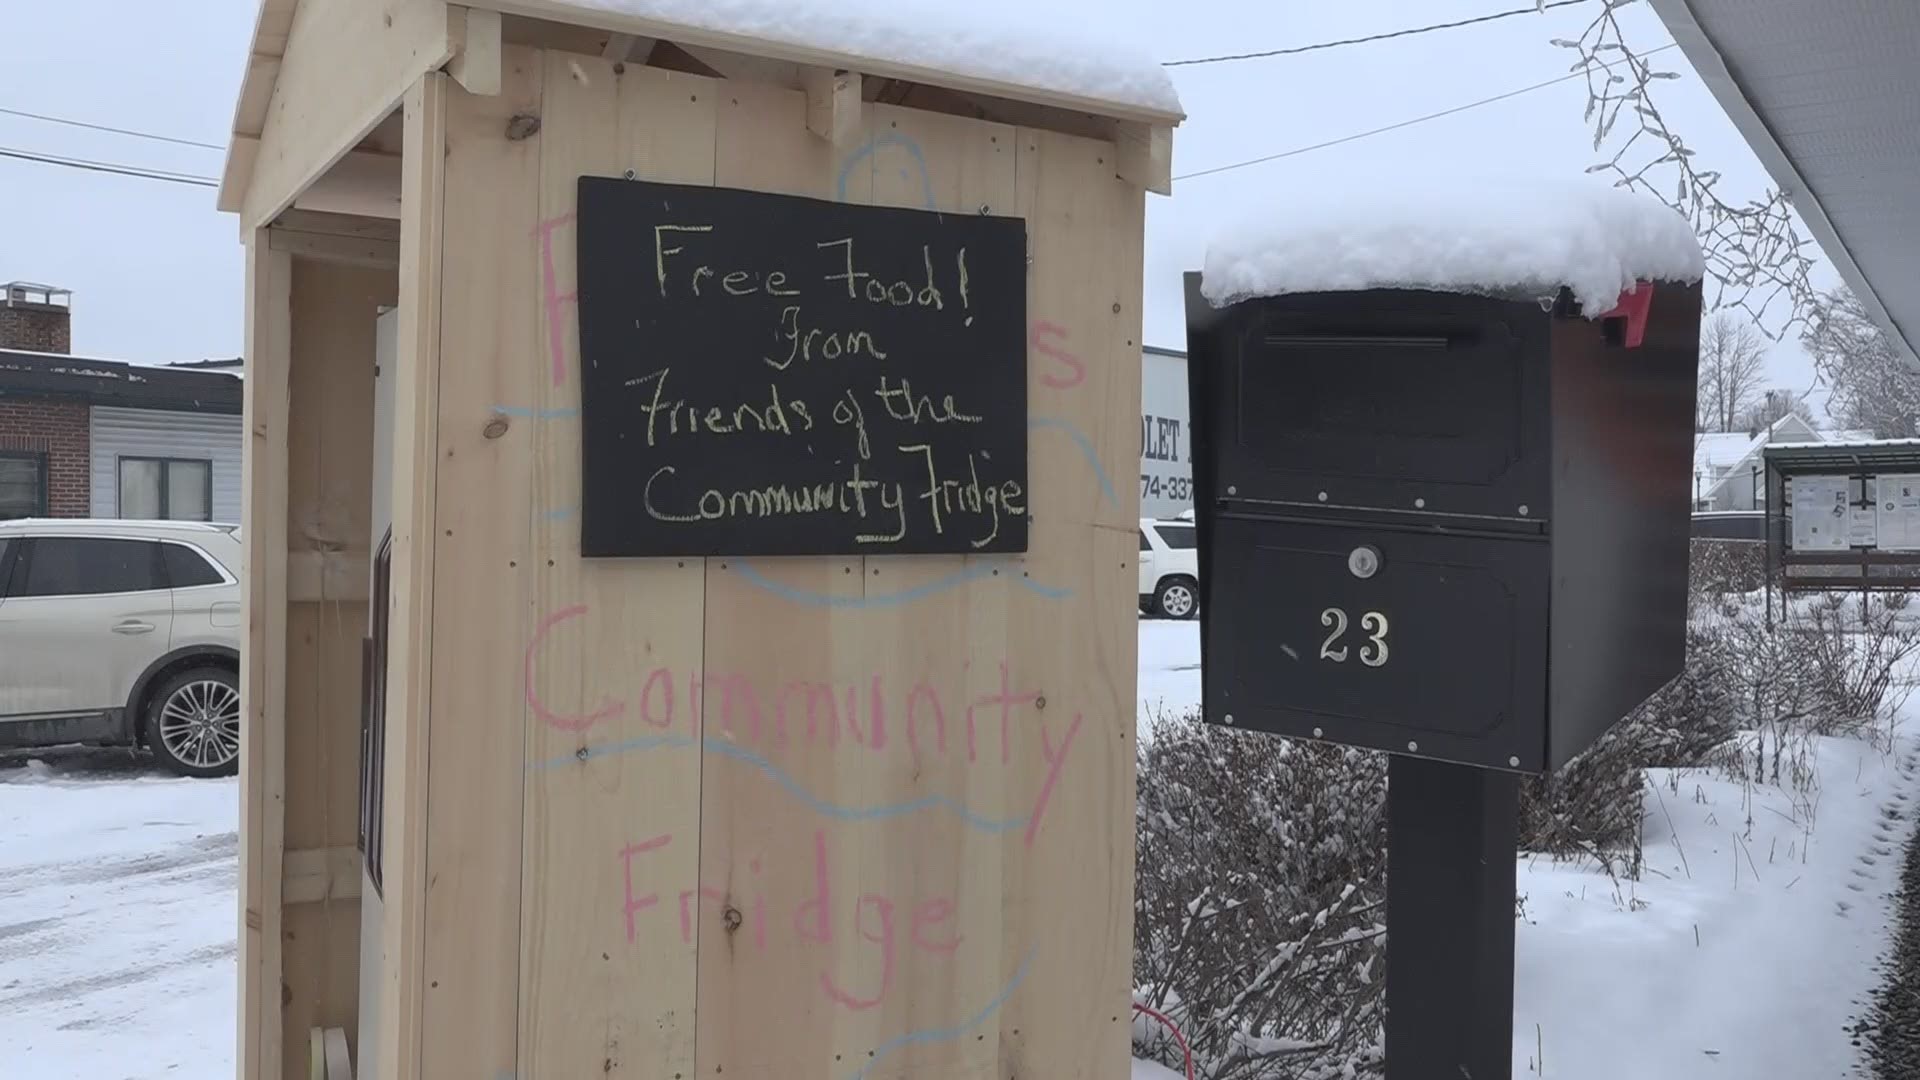 Two women in Skowhegan started a community refrigerator on Commercial Street at the town's chamber of commerce. People can donate to or take from it anonymously.